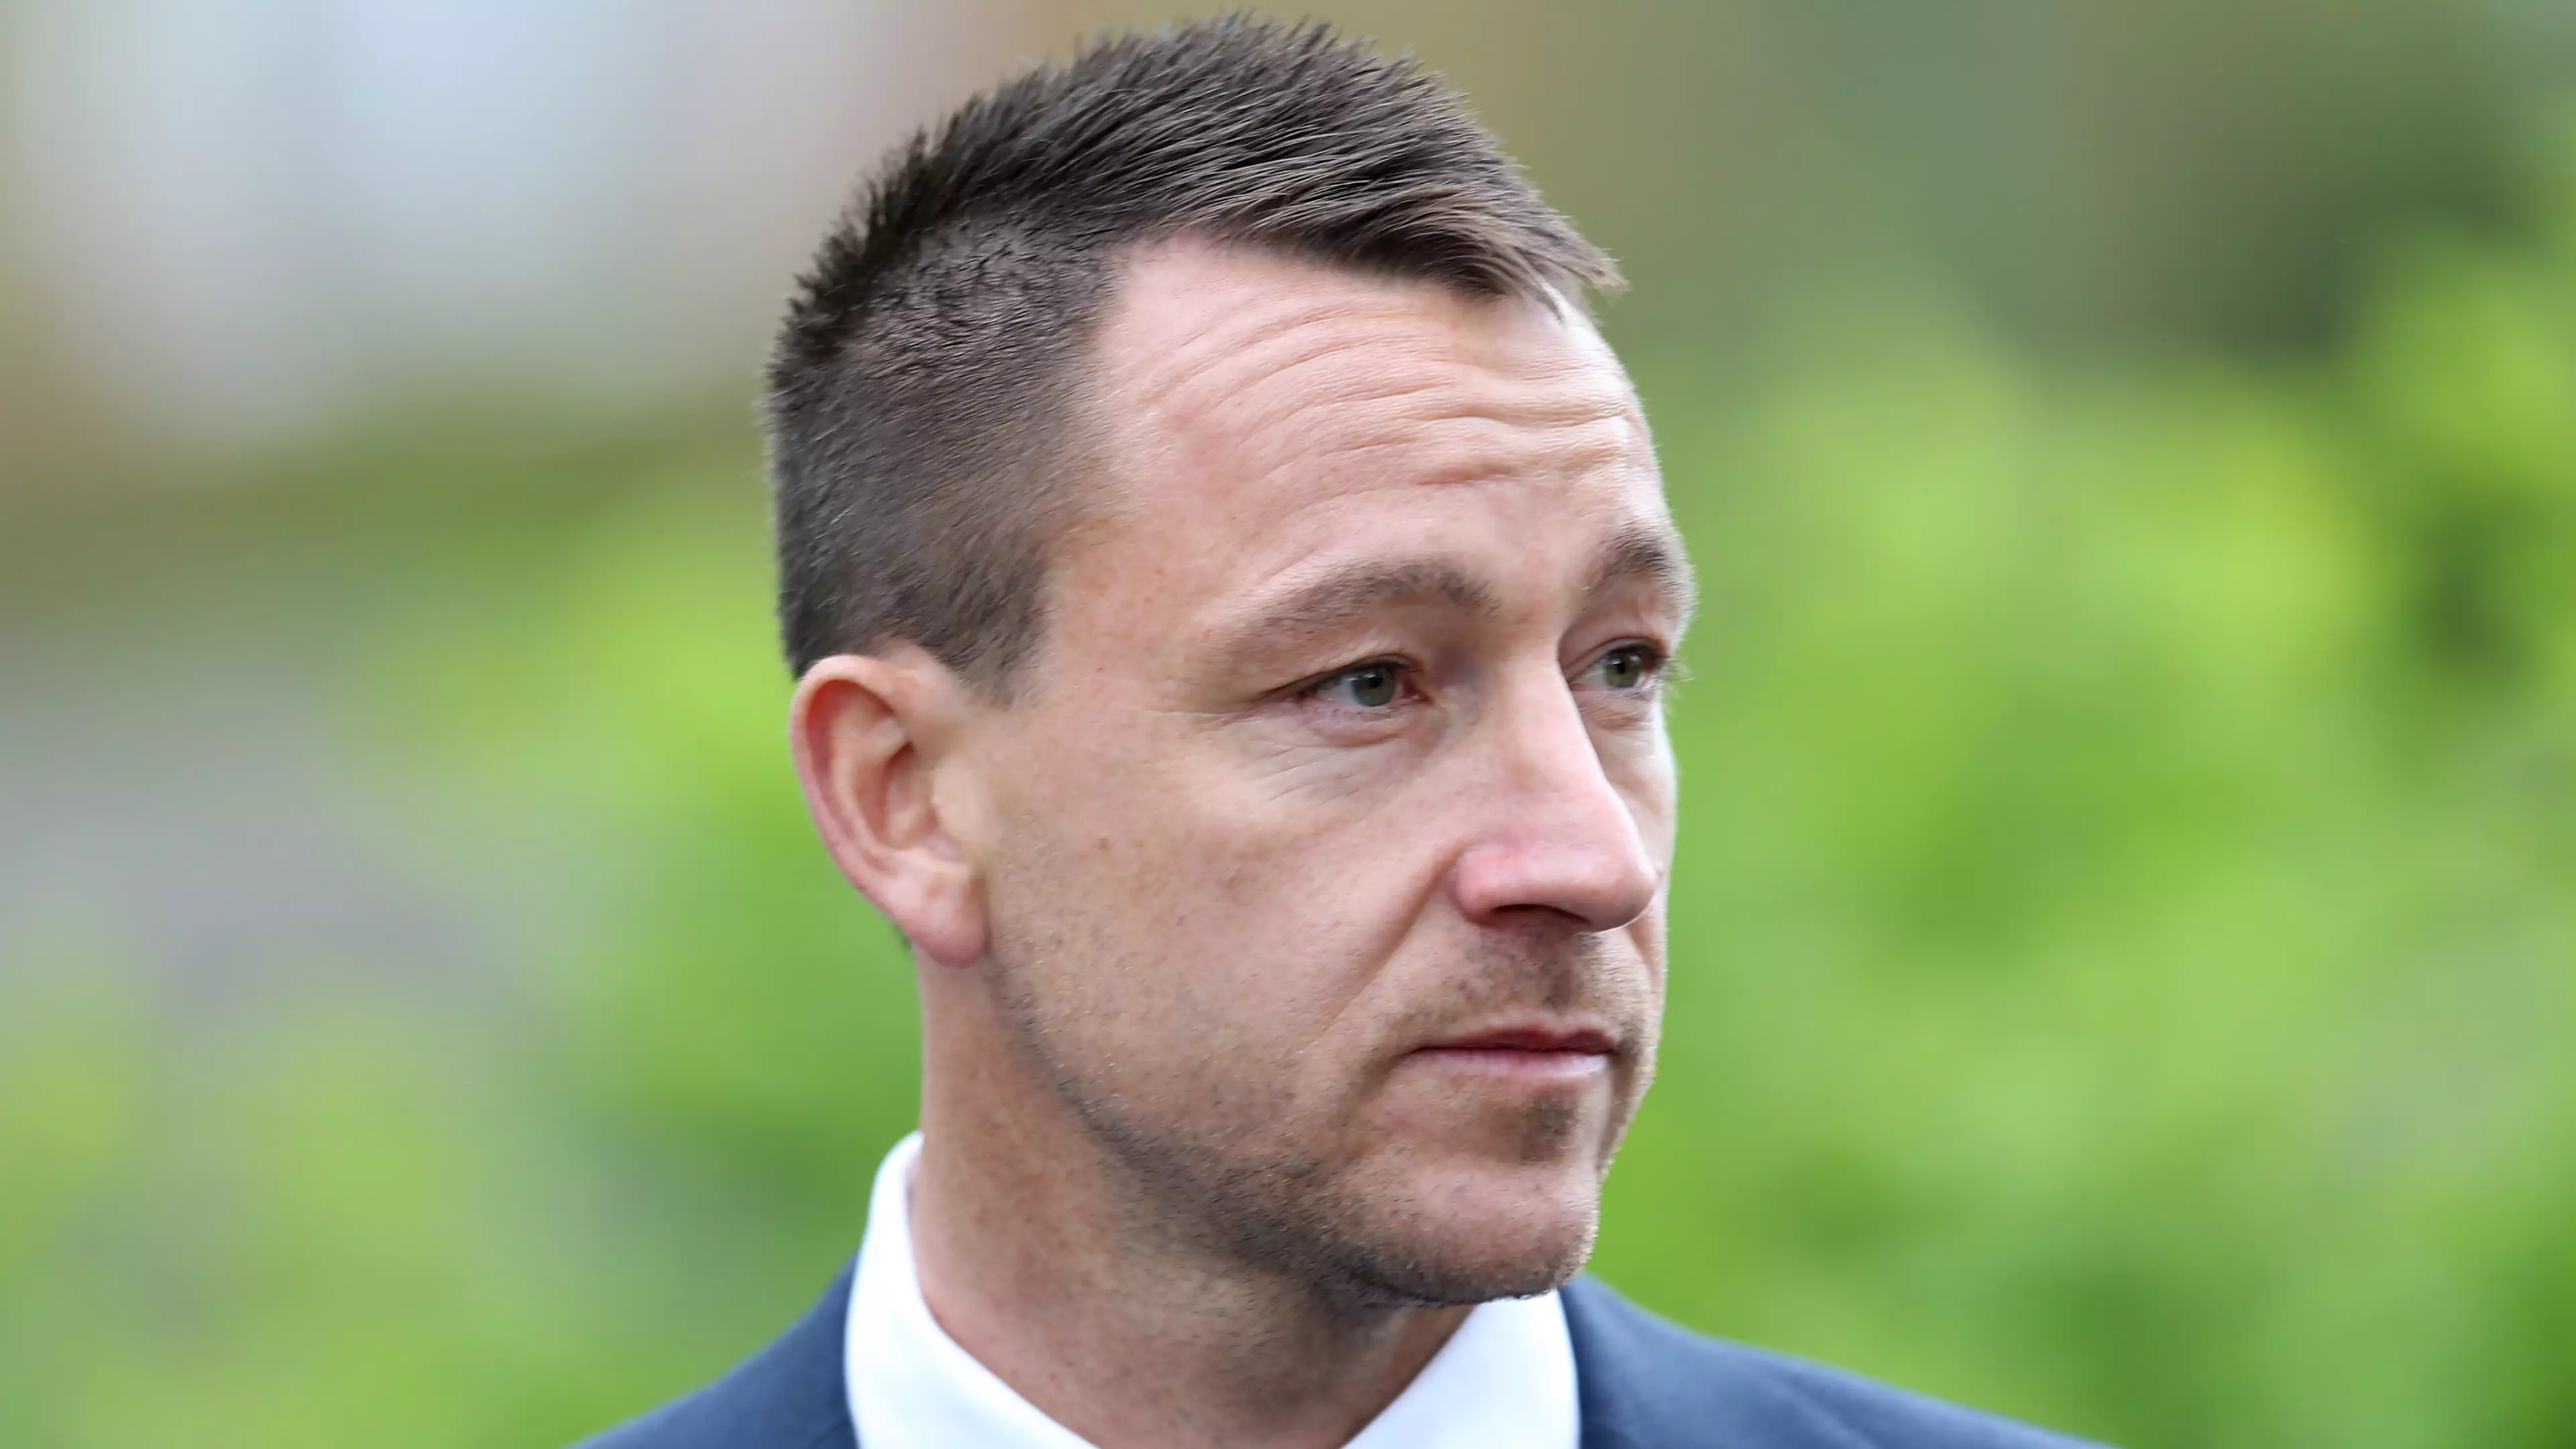 John Terry Responds To Accusations Of 'Sexism' Against Female Football Commentator